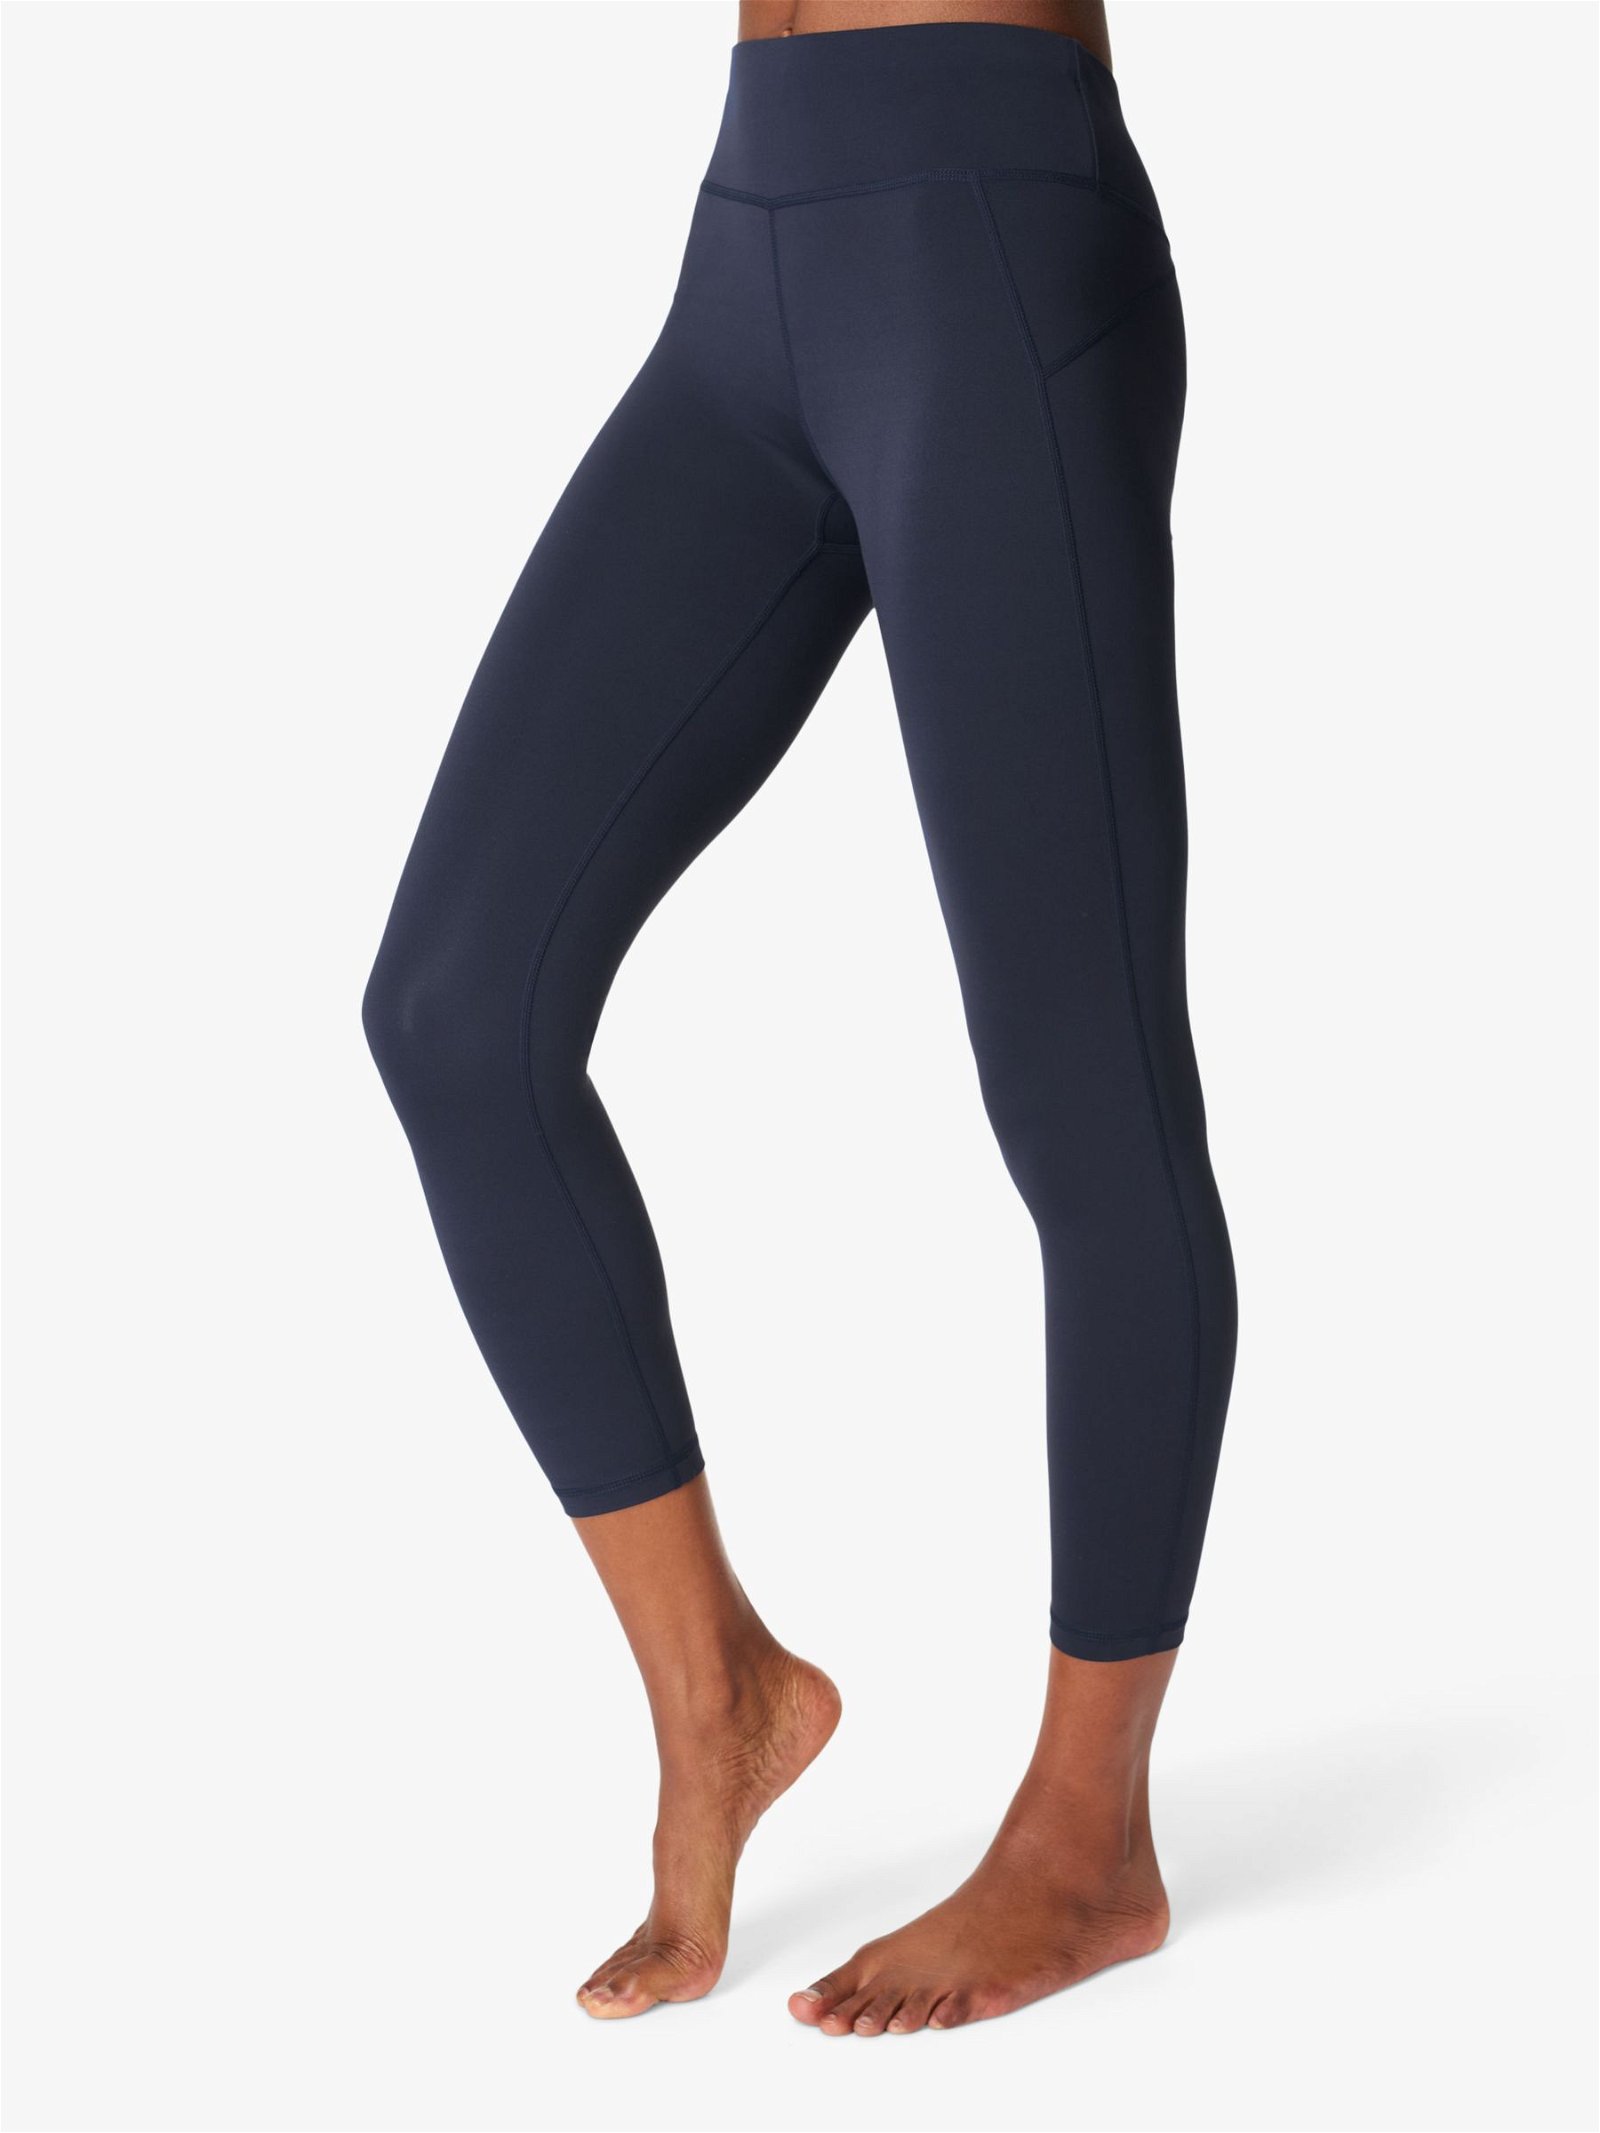 Sweaty Betty Athlete 7/8 Crop Seamless Workout Leggings in Smoked Blue Marl  NWT Size XS - $65 New With Tags - From Tinnie